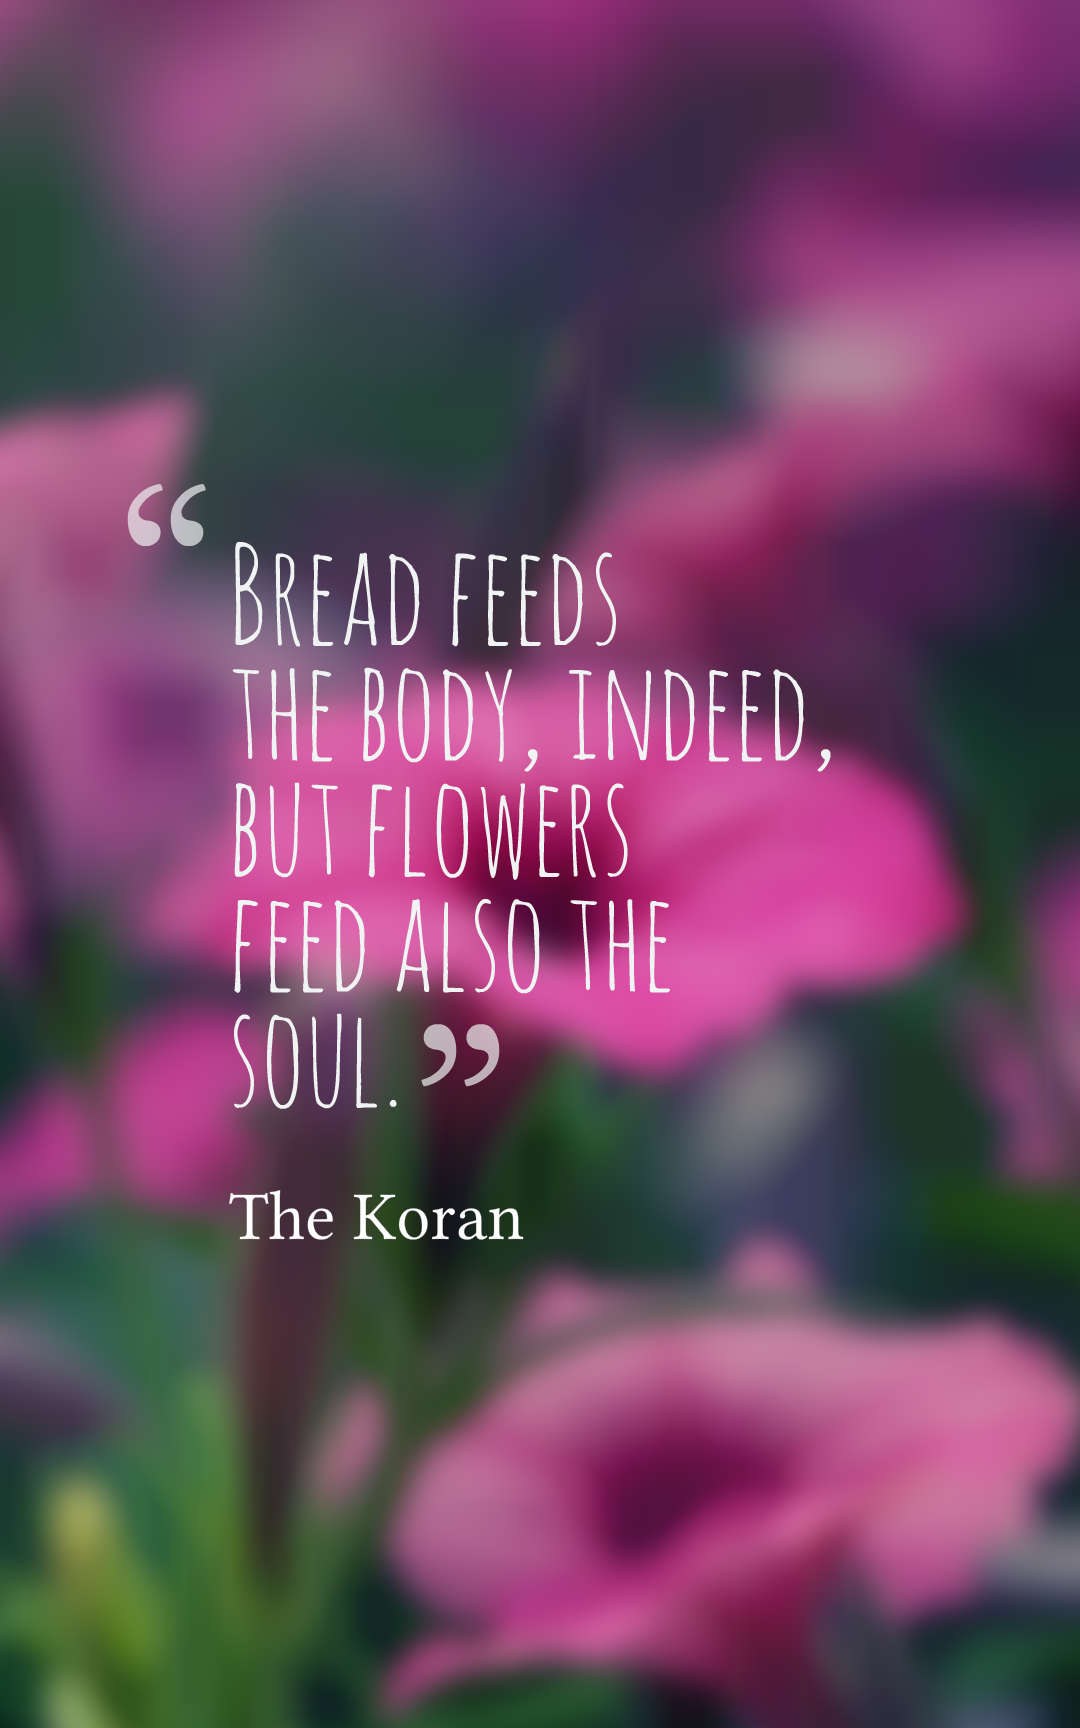 Bread feeds the body, indeed, but flowers feed also the soul.